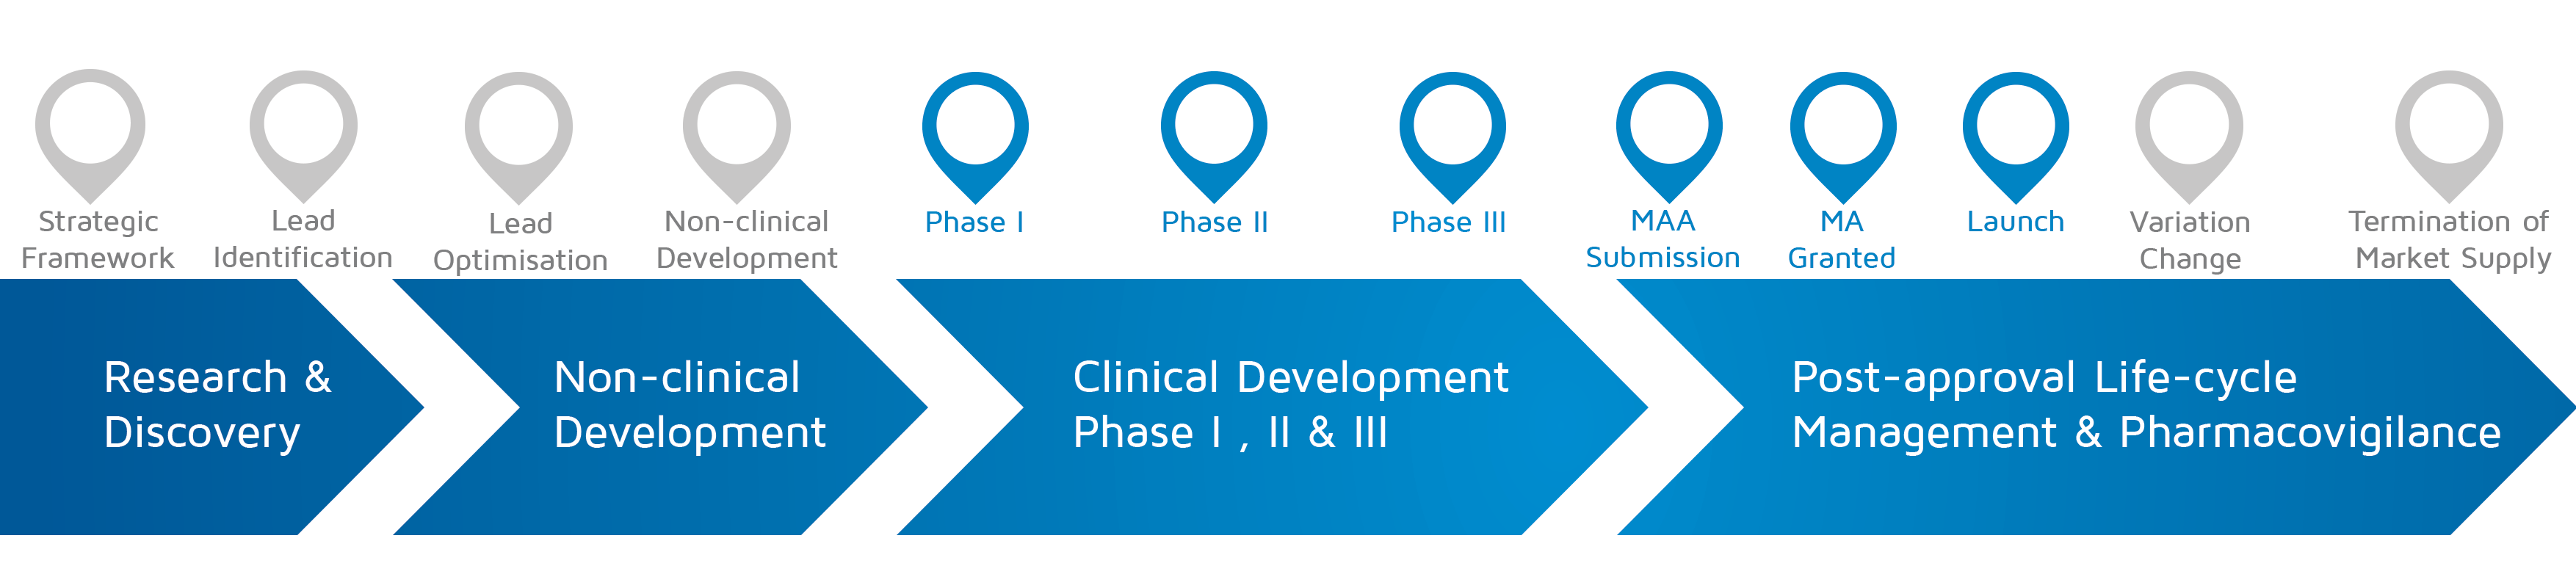 A visual representation of in which phase of medicines research and development process an activity takes place with Phase I-II-III, MAA submission, MA granted, Launch highlighted.